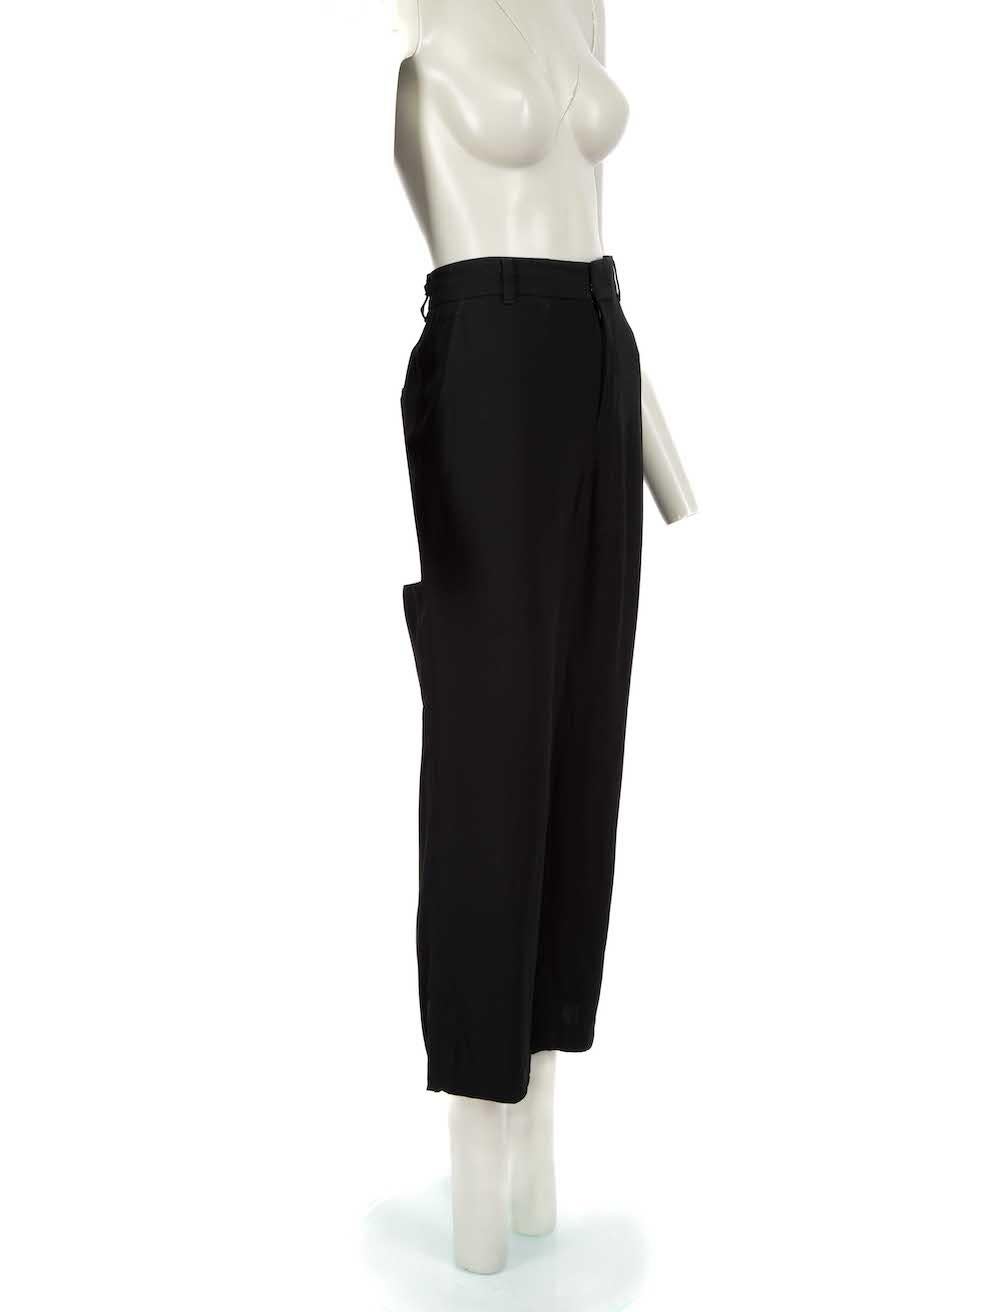 CONDITION is Very good. Minimal wear to trousers is evident. Minimal wear to fabric composition with single small pluck to the weave found down the leg on this used A.P.C. designer resale item.
 
 Details
 Black
 Viscose
 Trousers
 Straight fit
